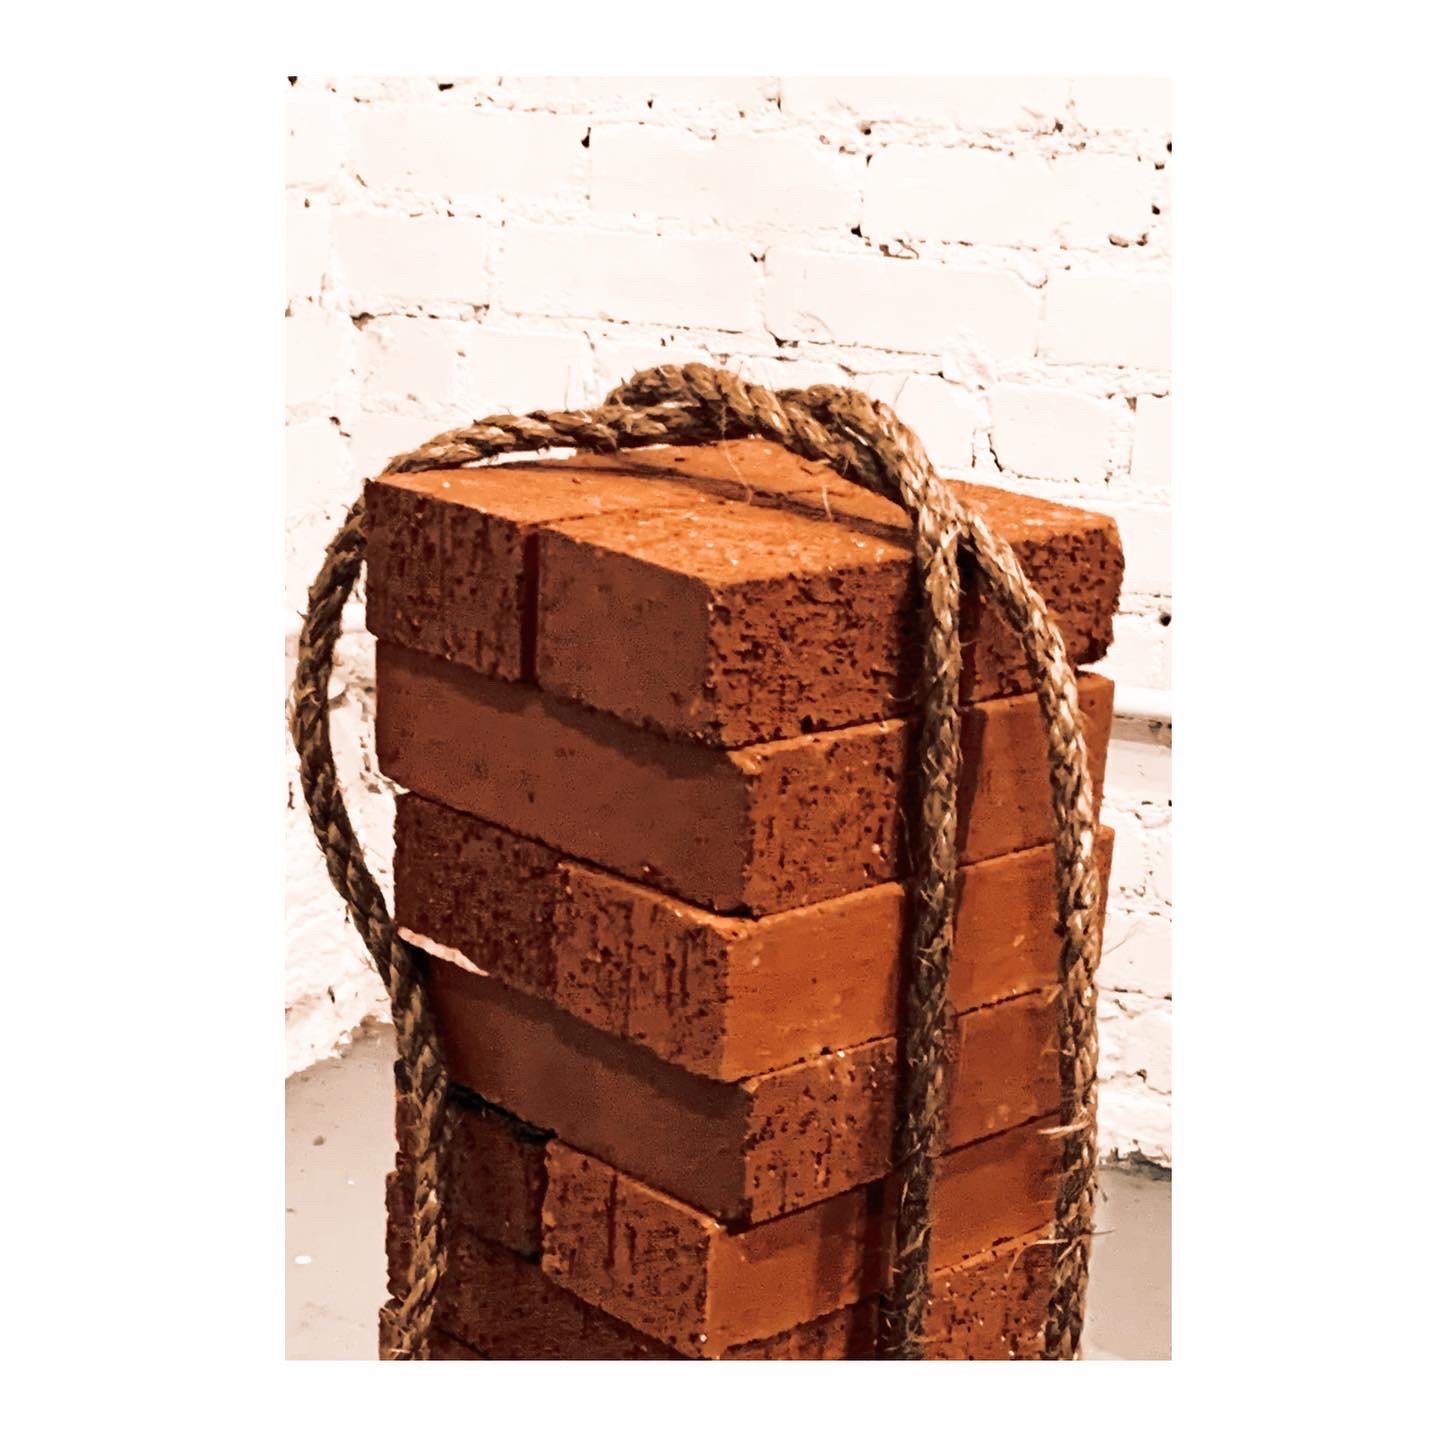 Stack of Bricks Tied with Rope Noe Pina 2021 knot.JPG